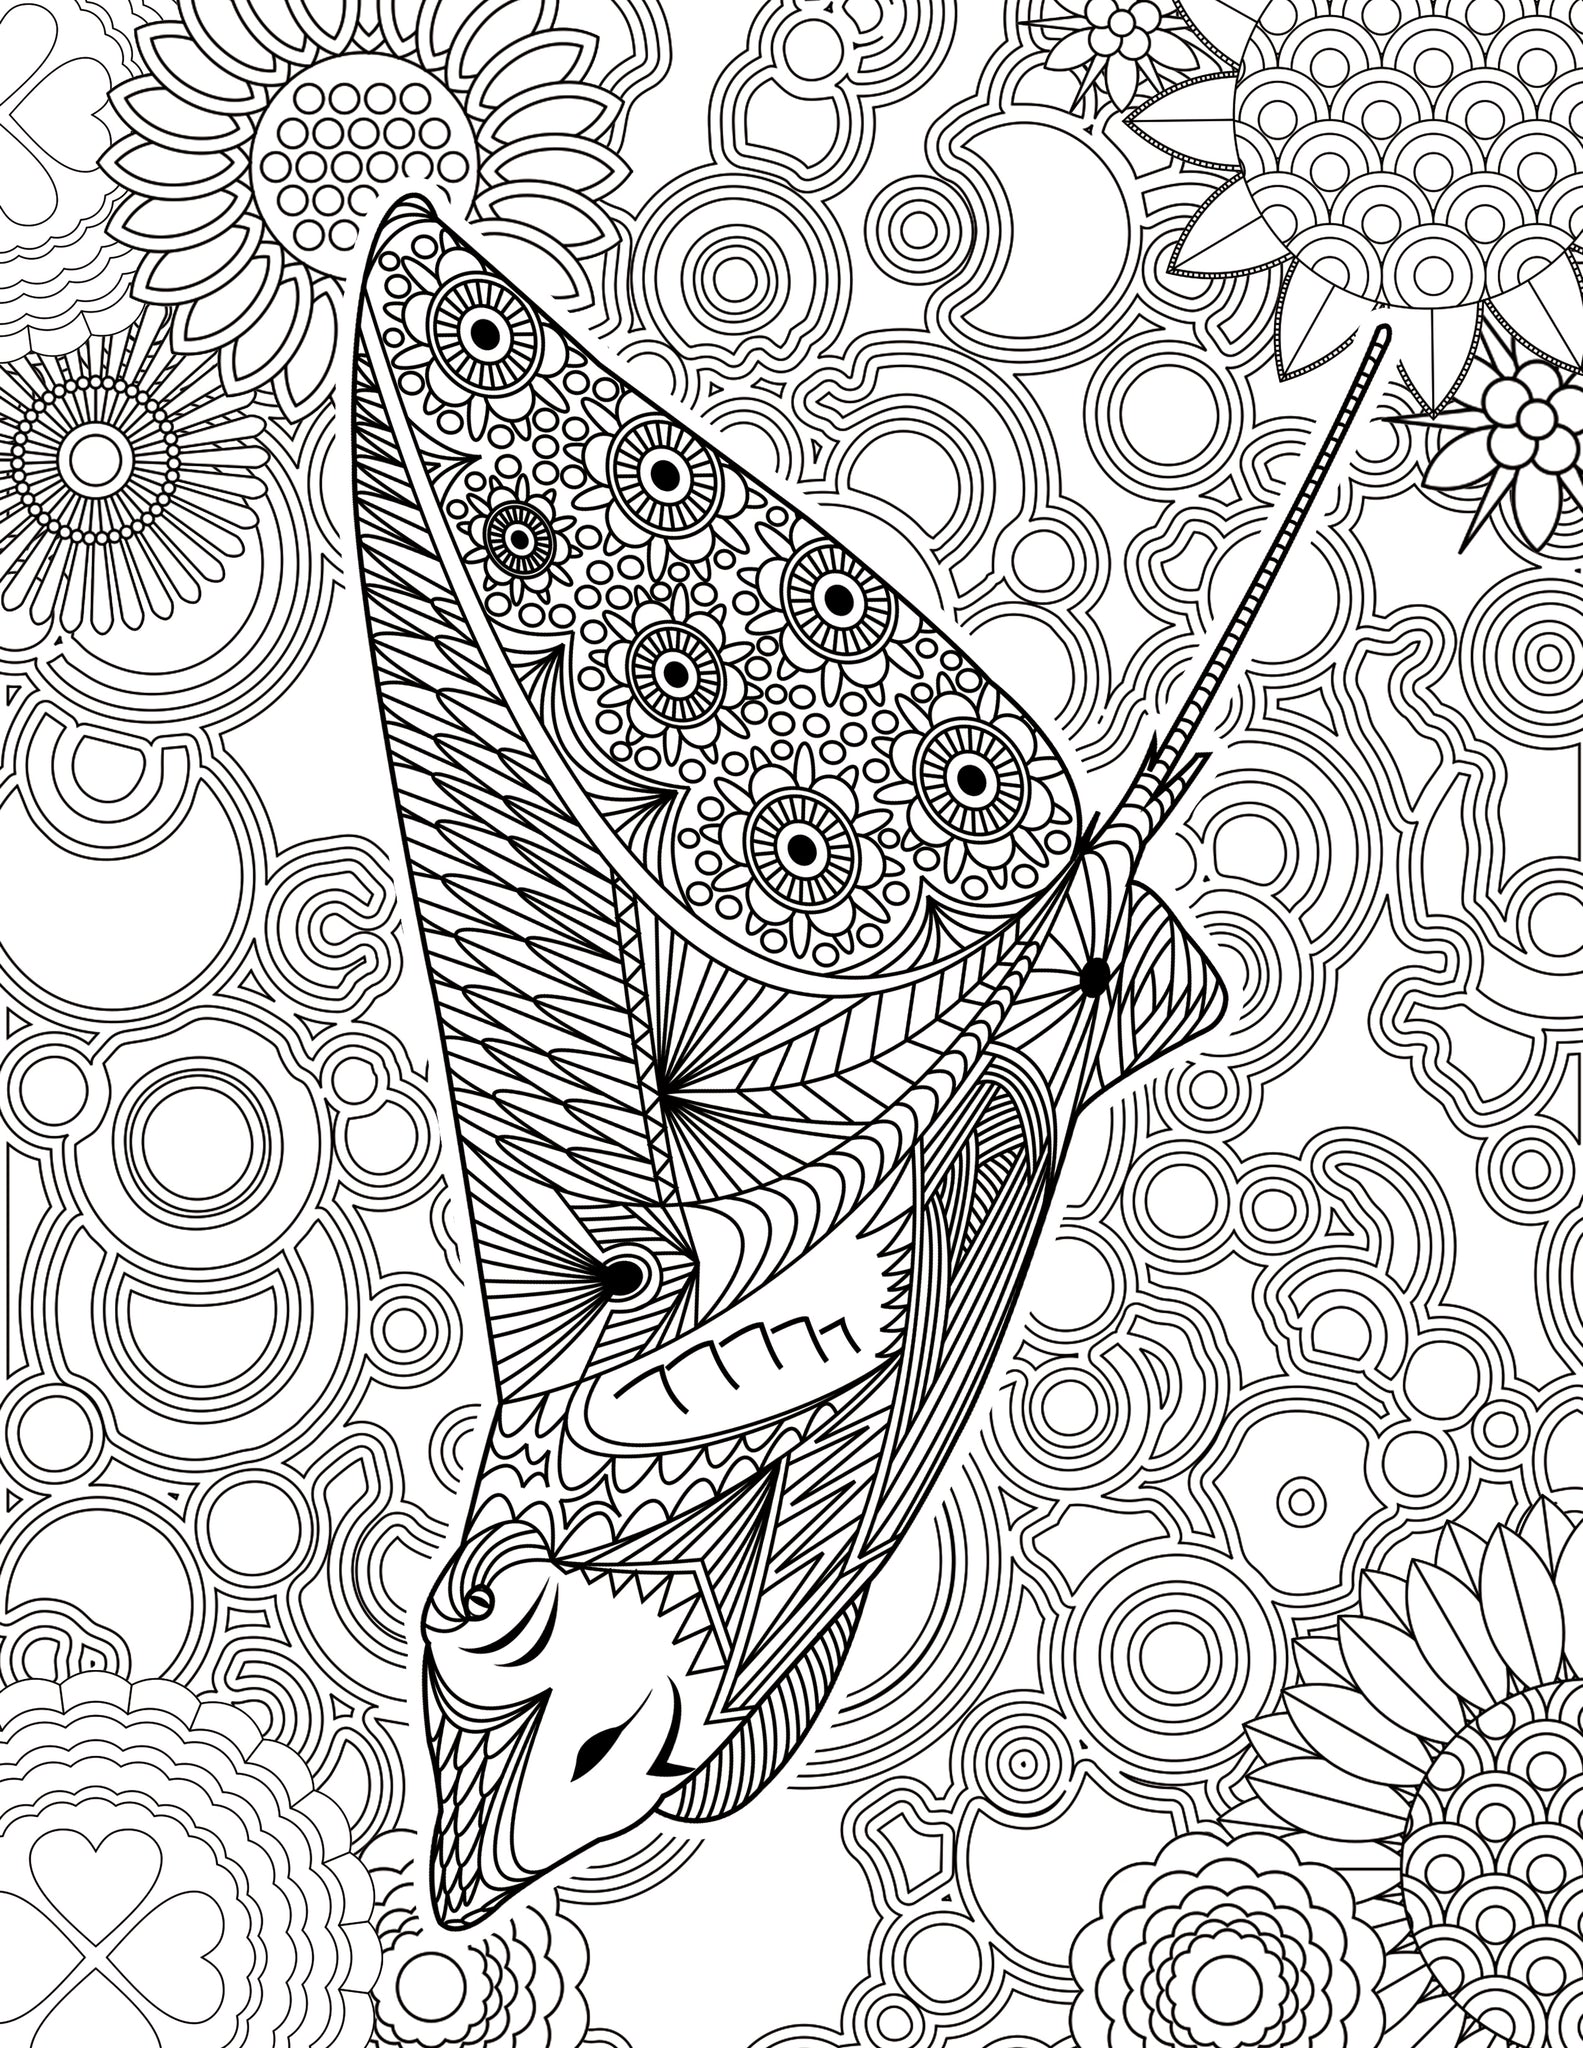 Oceans: Stress Relieving Coloring Books for Adults - Item #2110